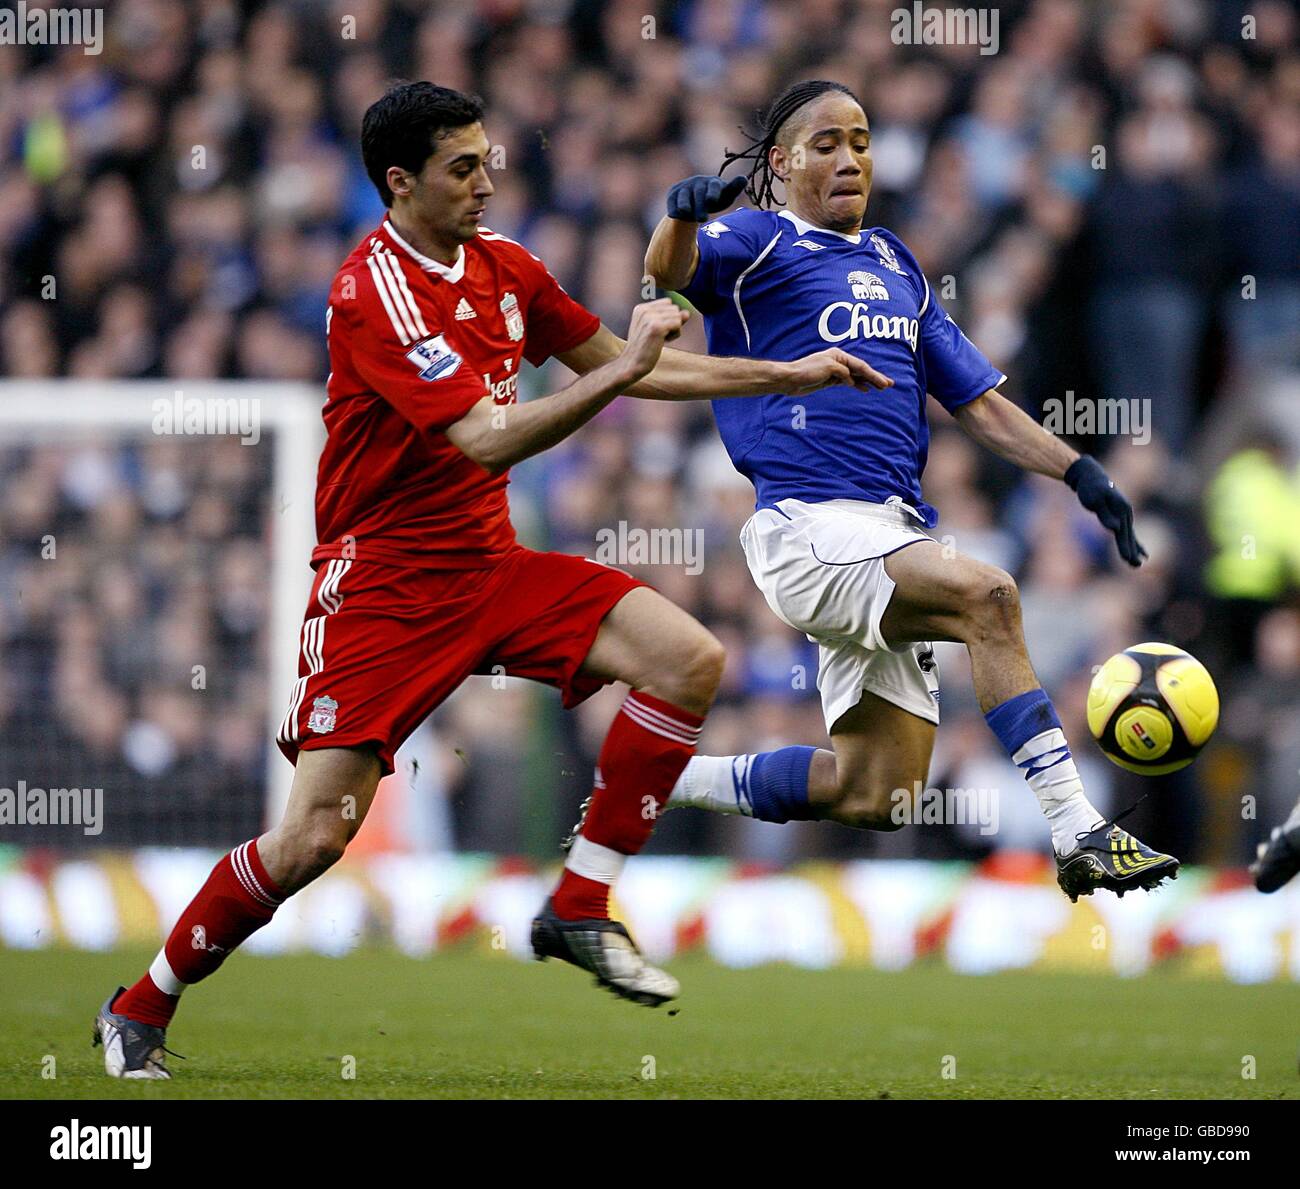 Soccer - FA Cup - Fourth Round - Liverpool v Everton - Anfield. Everton's Steven Pienaar and Liverpool's Alvaro Arbeloa (left) battle for the ball Stock Photo